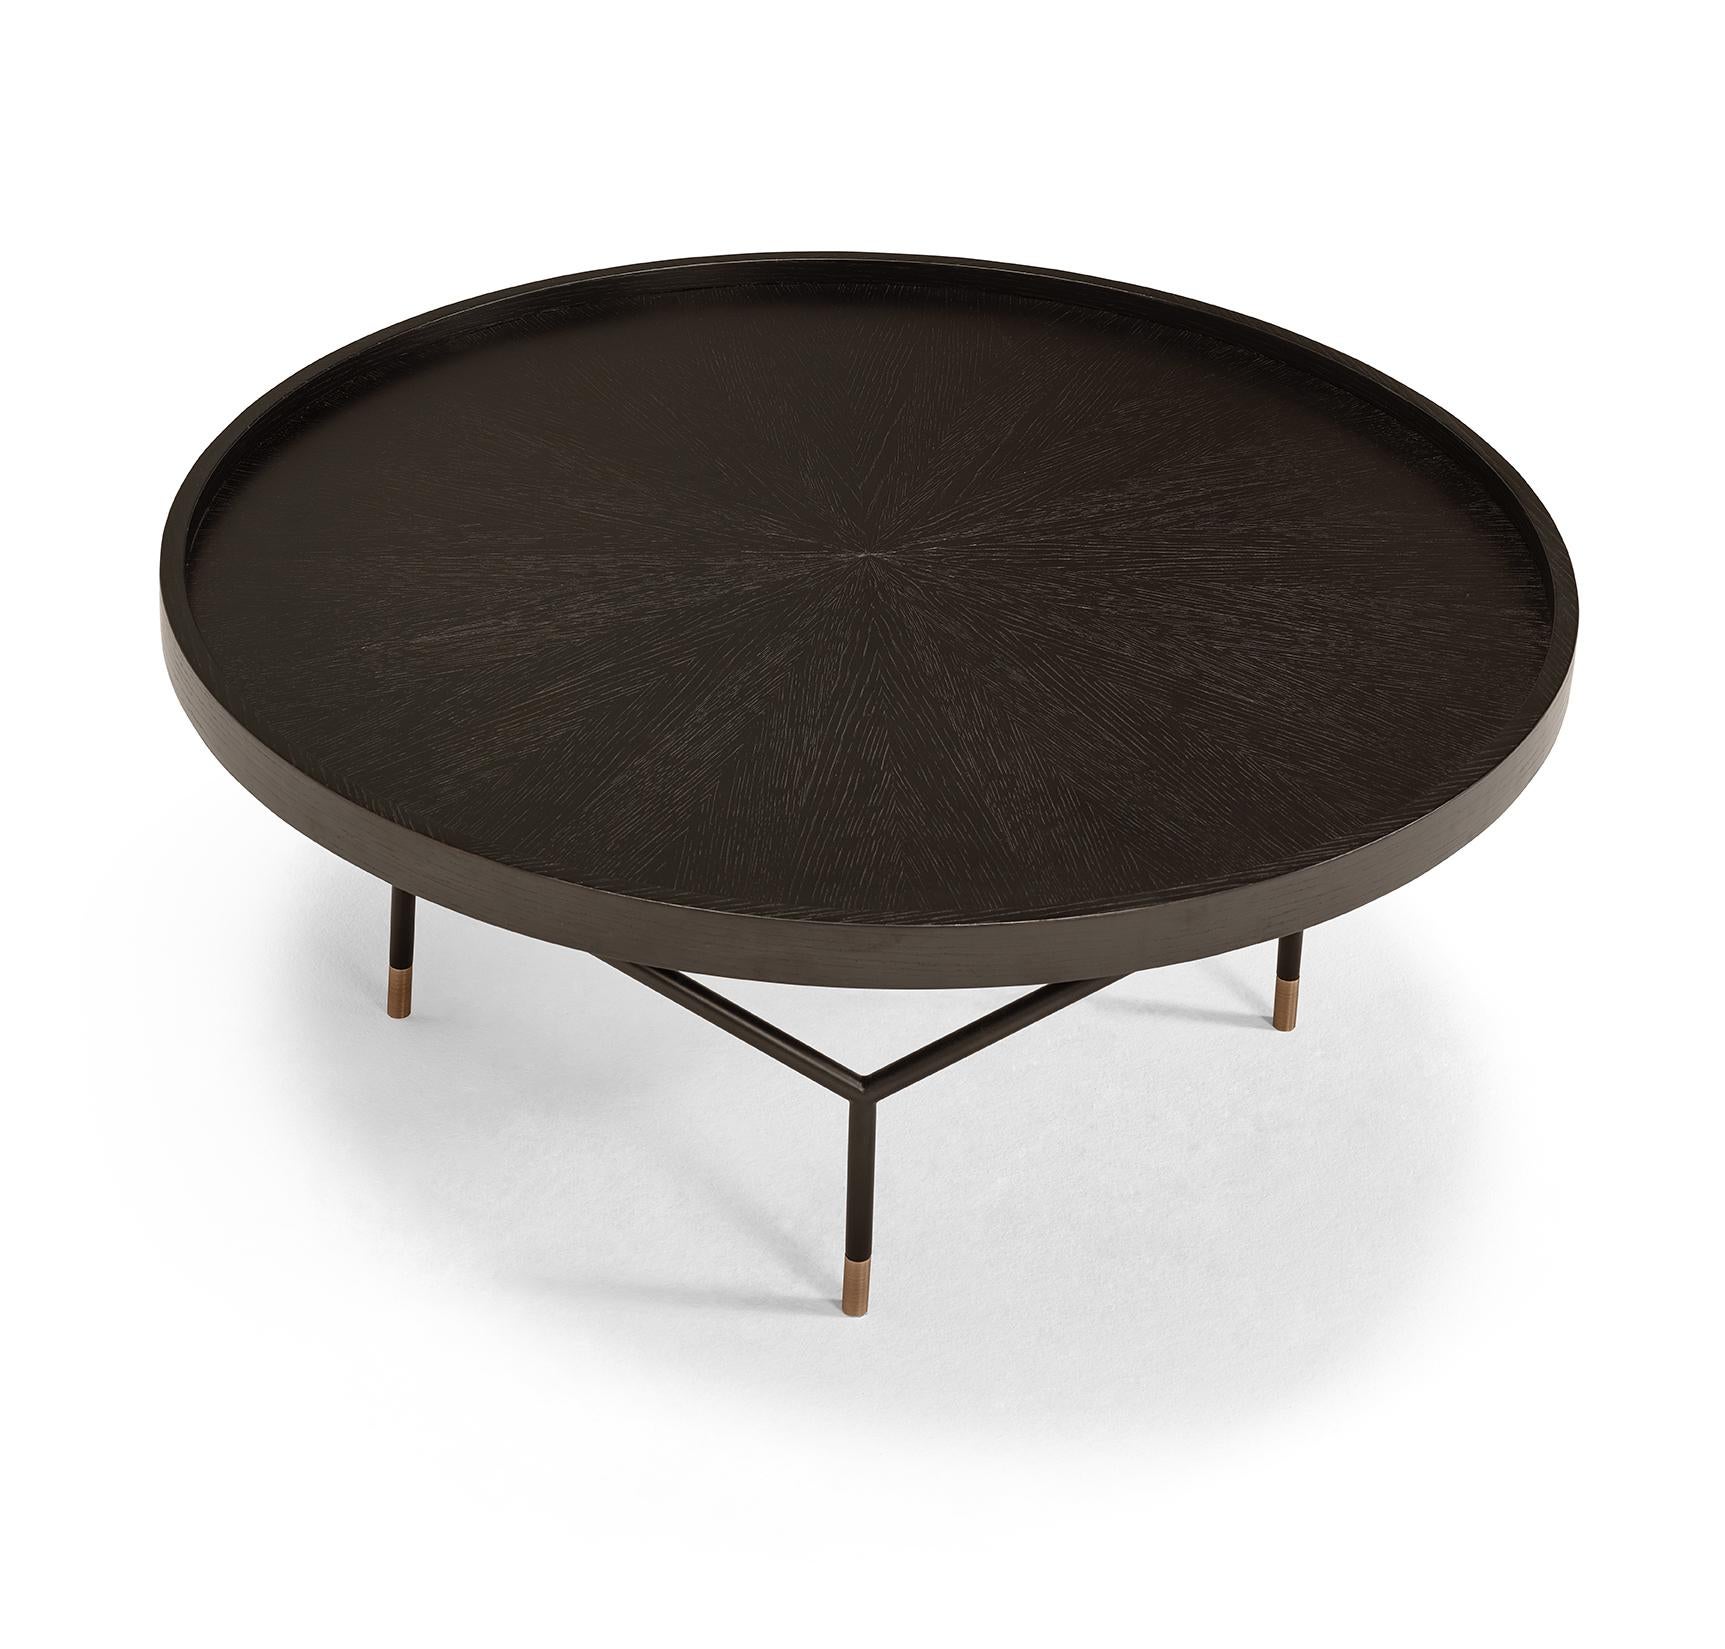 The combination of the round top with the straight-lines legs gives AVA coffee table a modern design, perfect for comtemporary living styles. The wooden top and metal base combines different finishes, as this model allows to mix and match